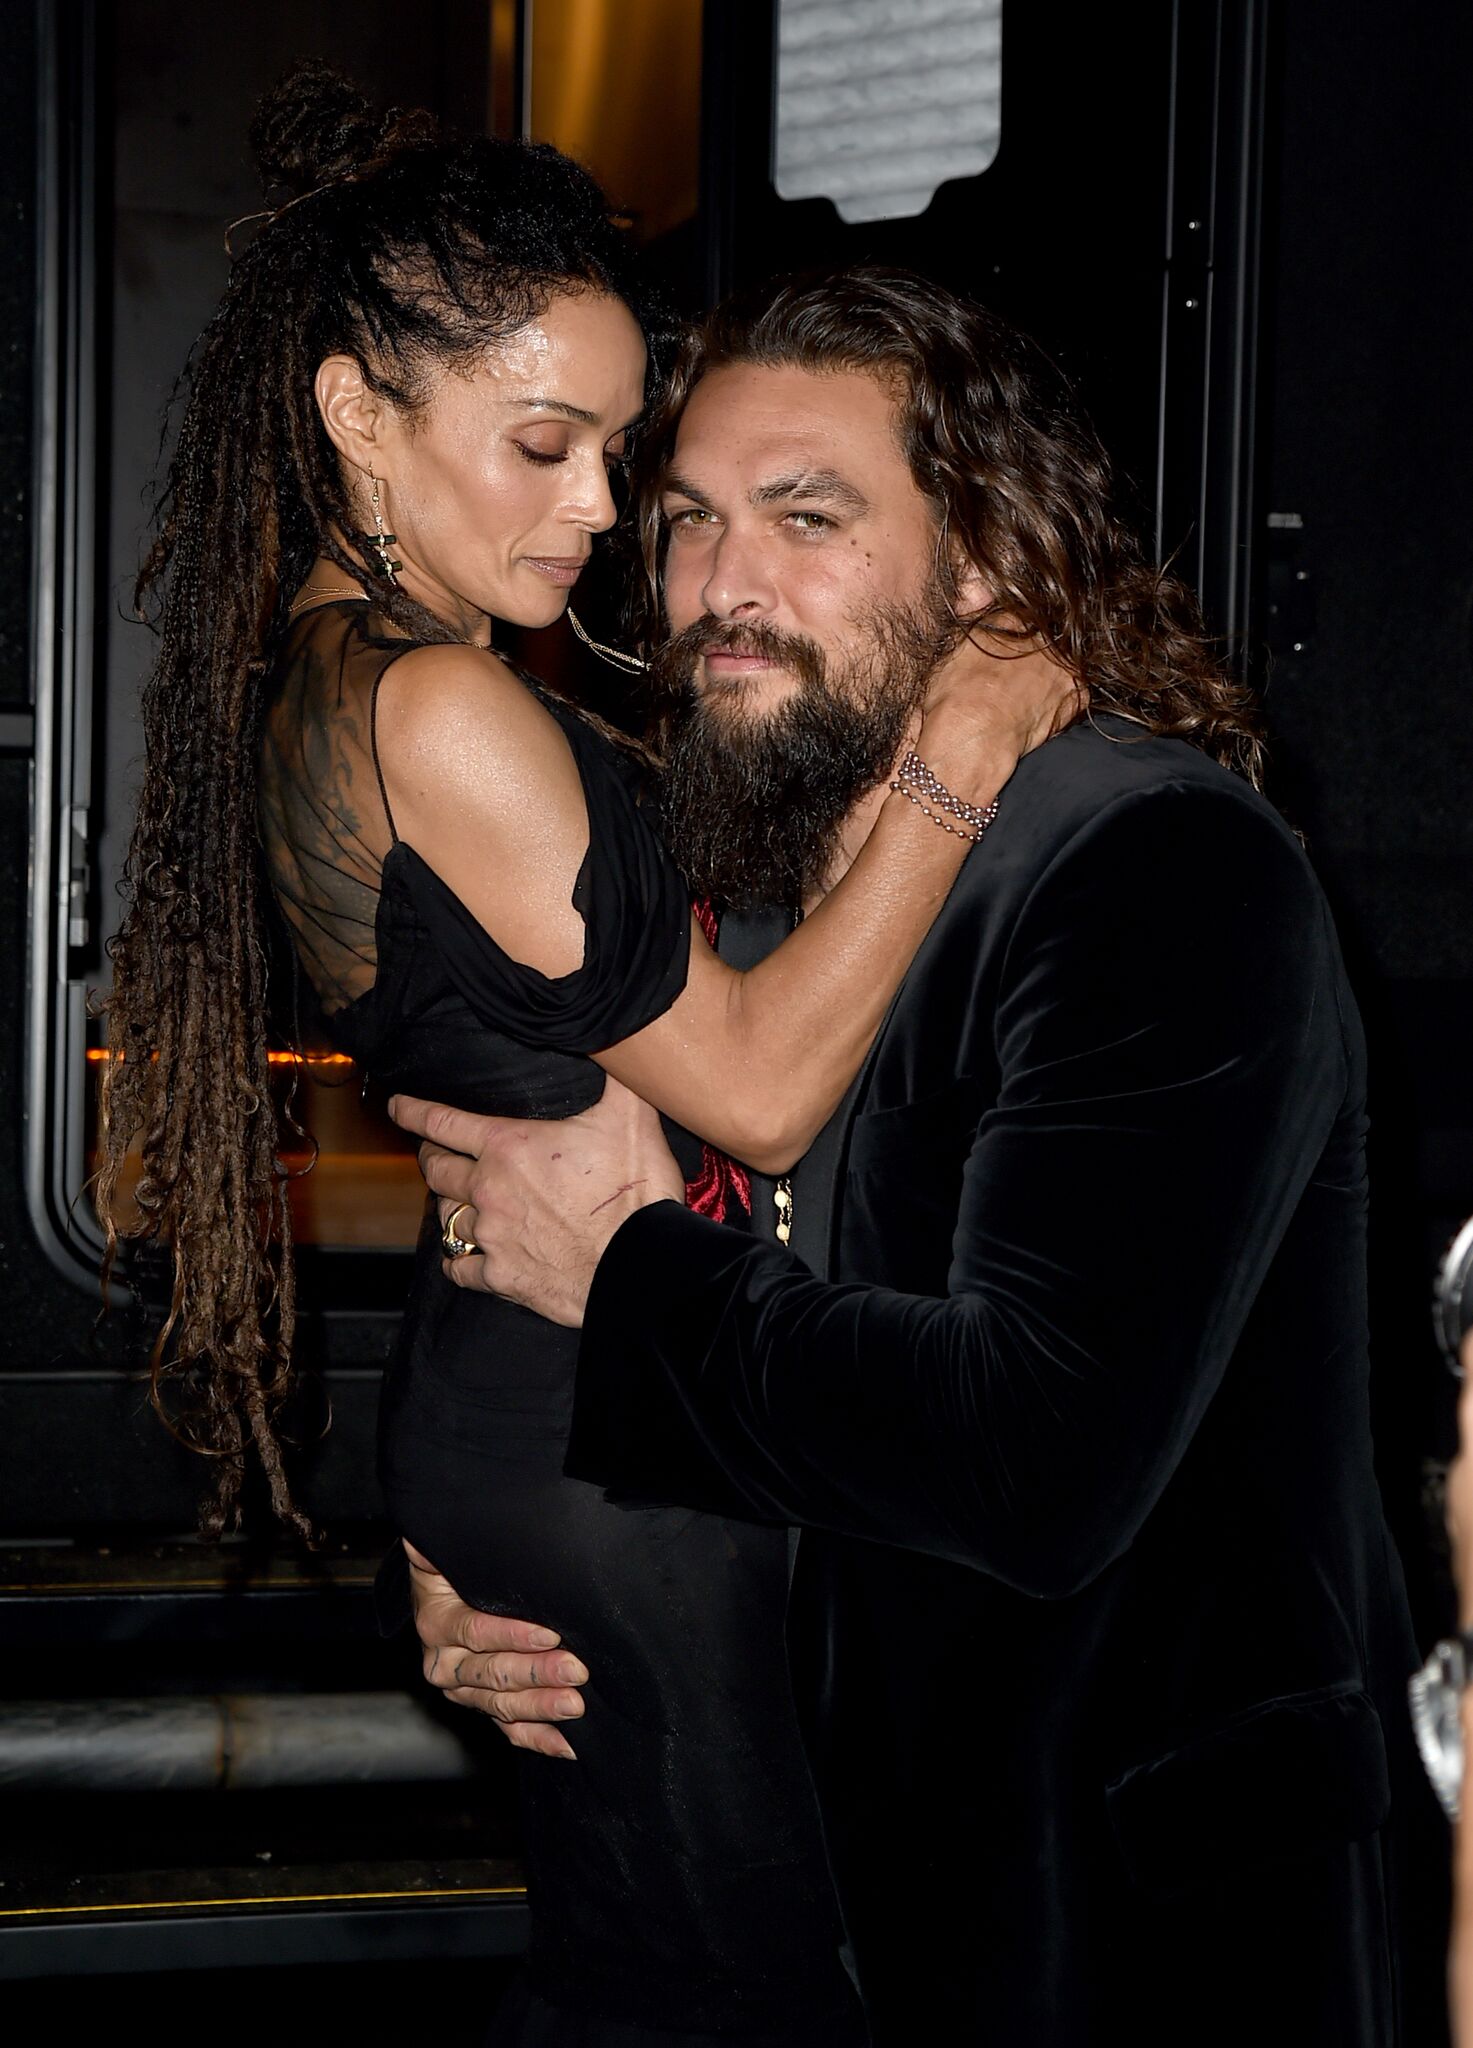  Lisa Bonet (L) and Jason Momoa attend the premiere of Warner Bros. Pictures' "Aquaman" | Getty Images